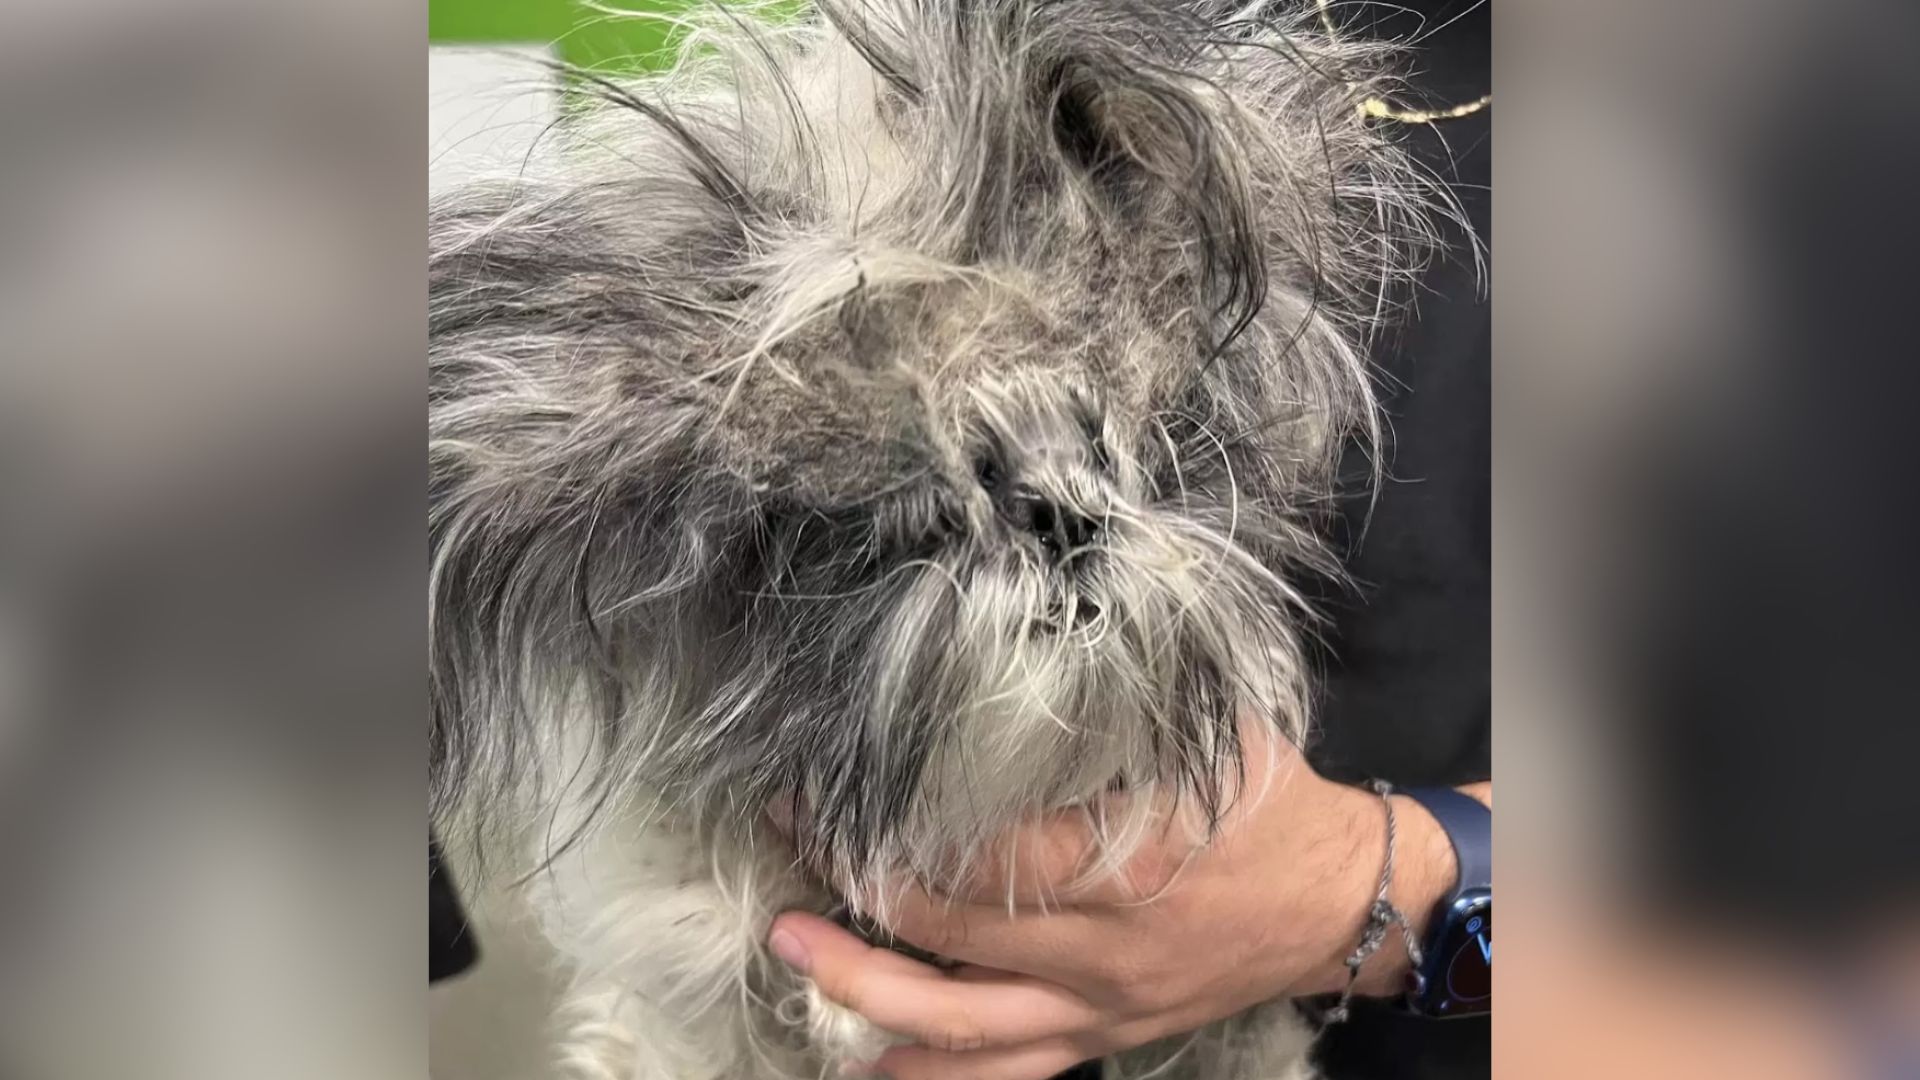 Haircut Reveals The True Beauty Of A Severely Matted Stray Dog Found On The Streets